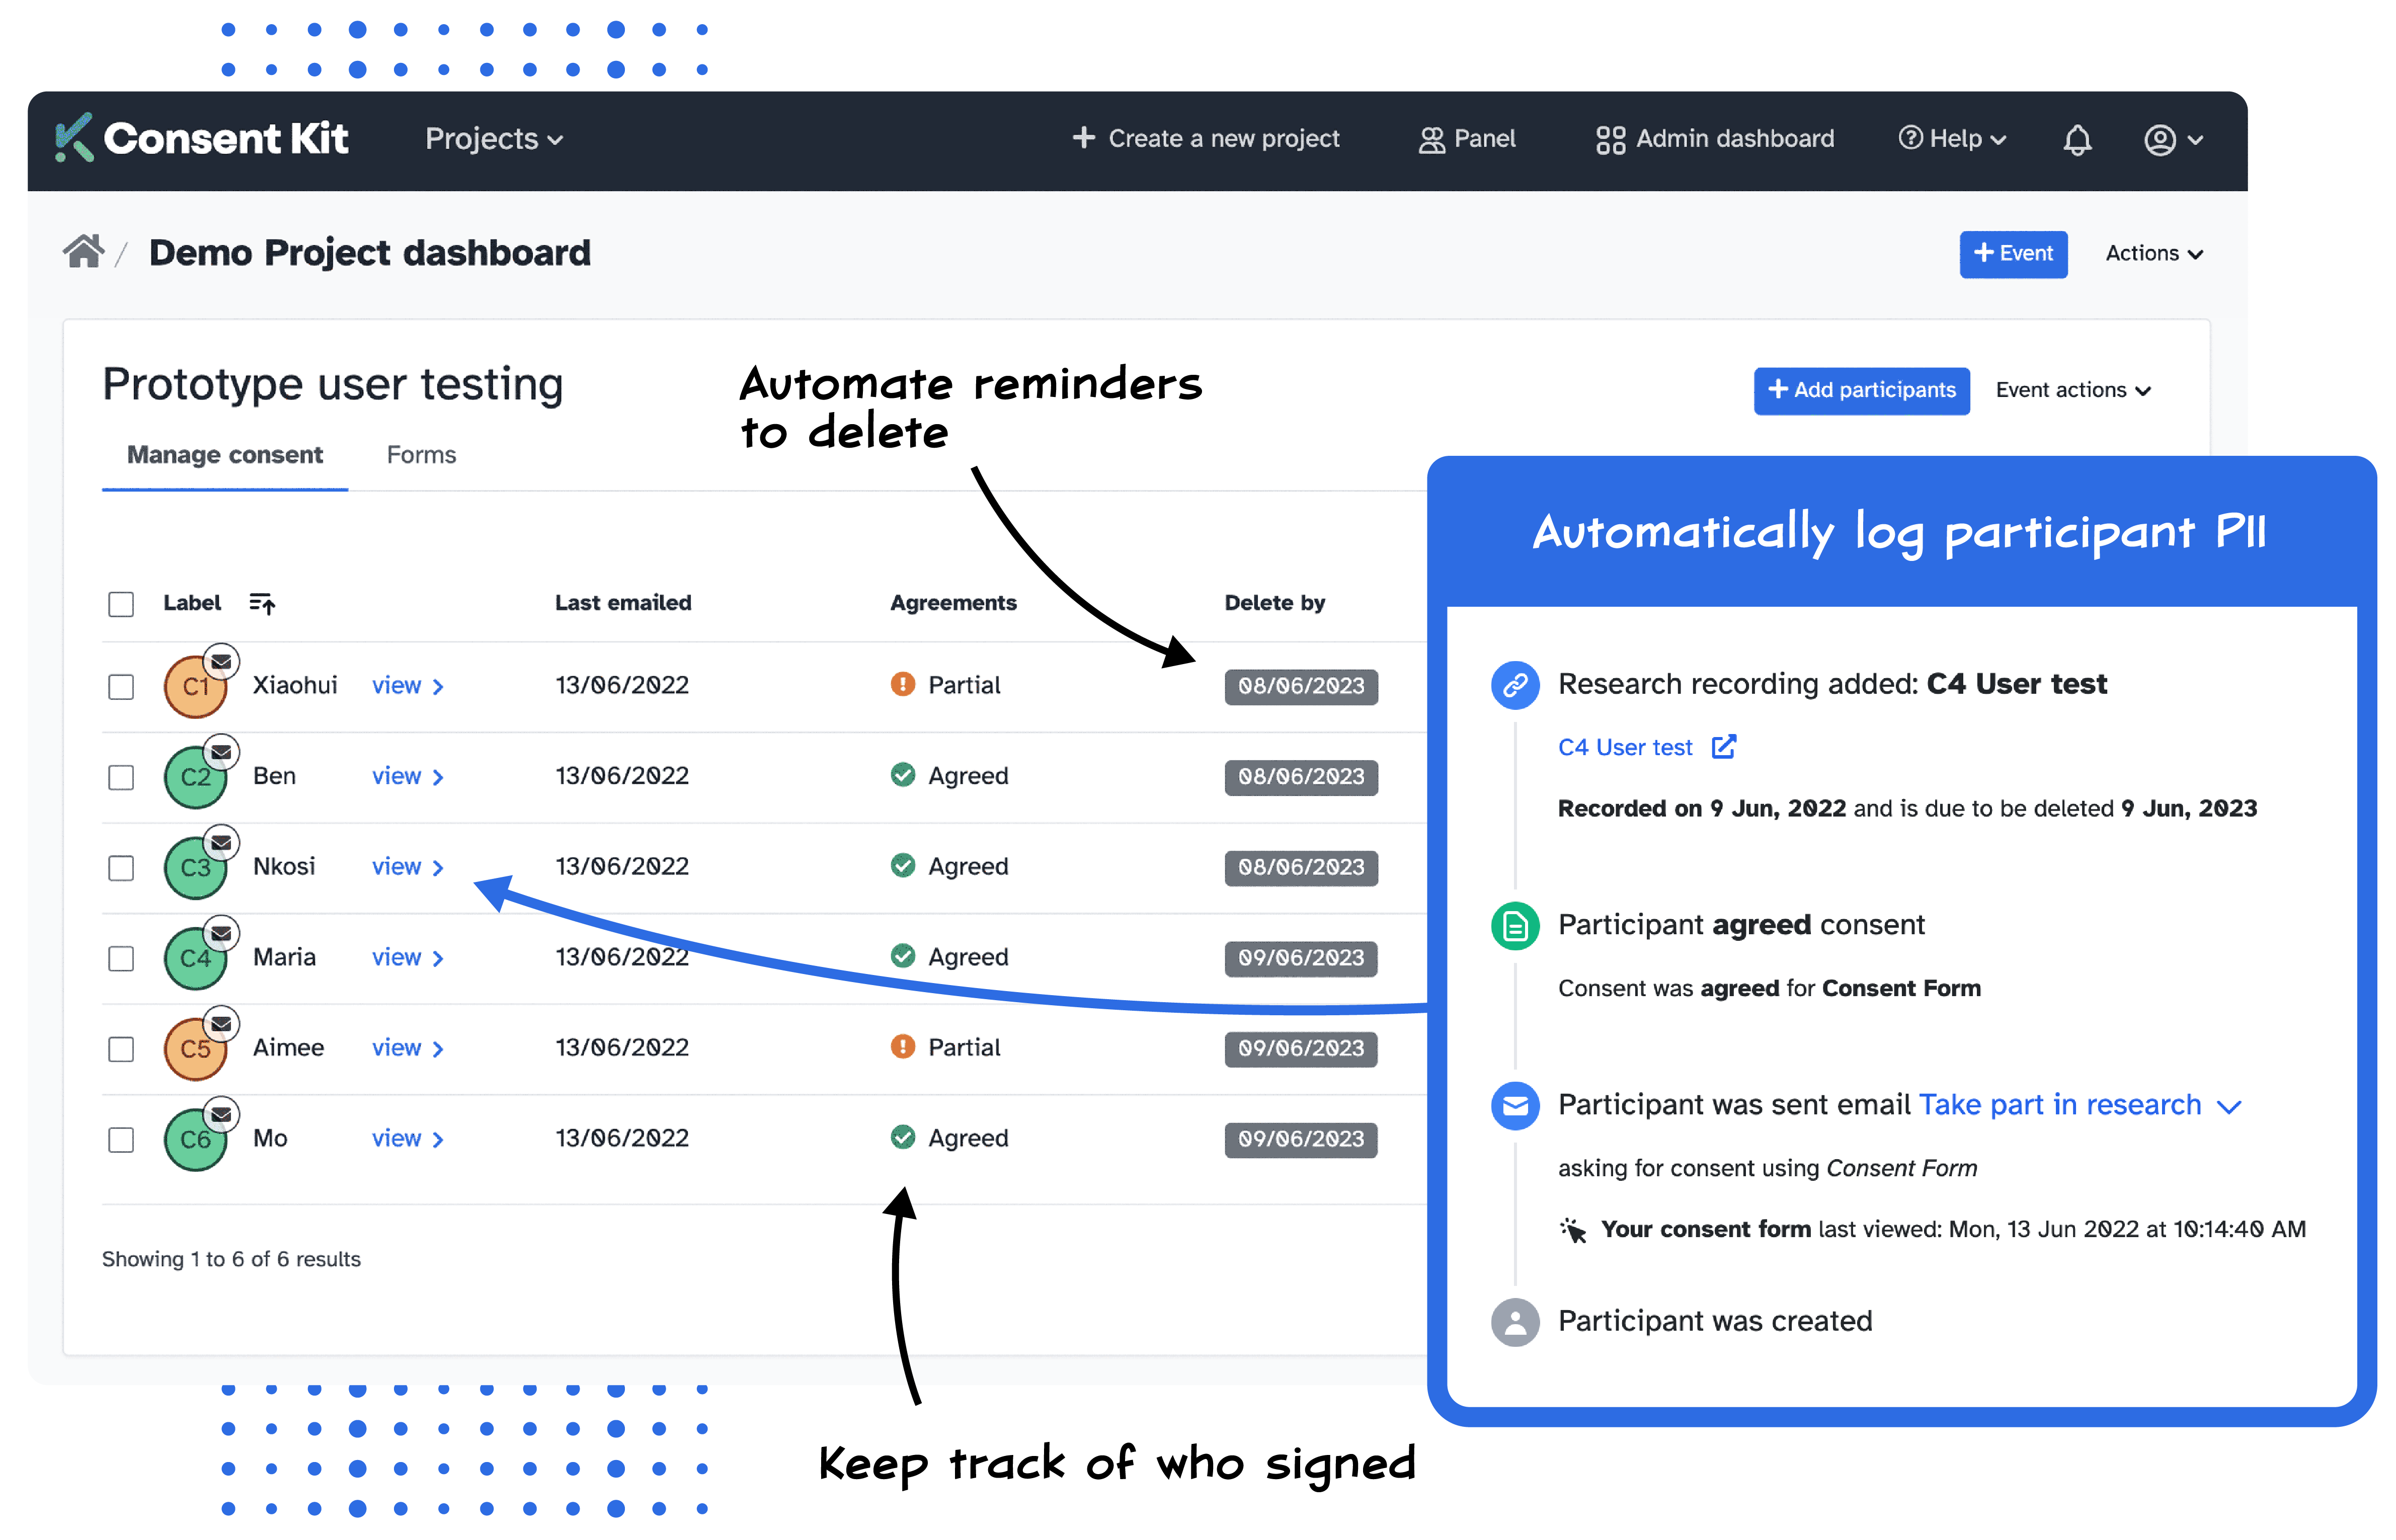 Keep track of who signed, automate reminders to delete, automatically log participant PII